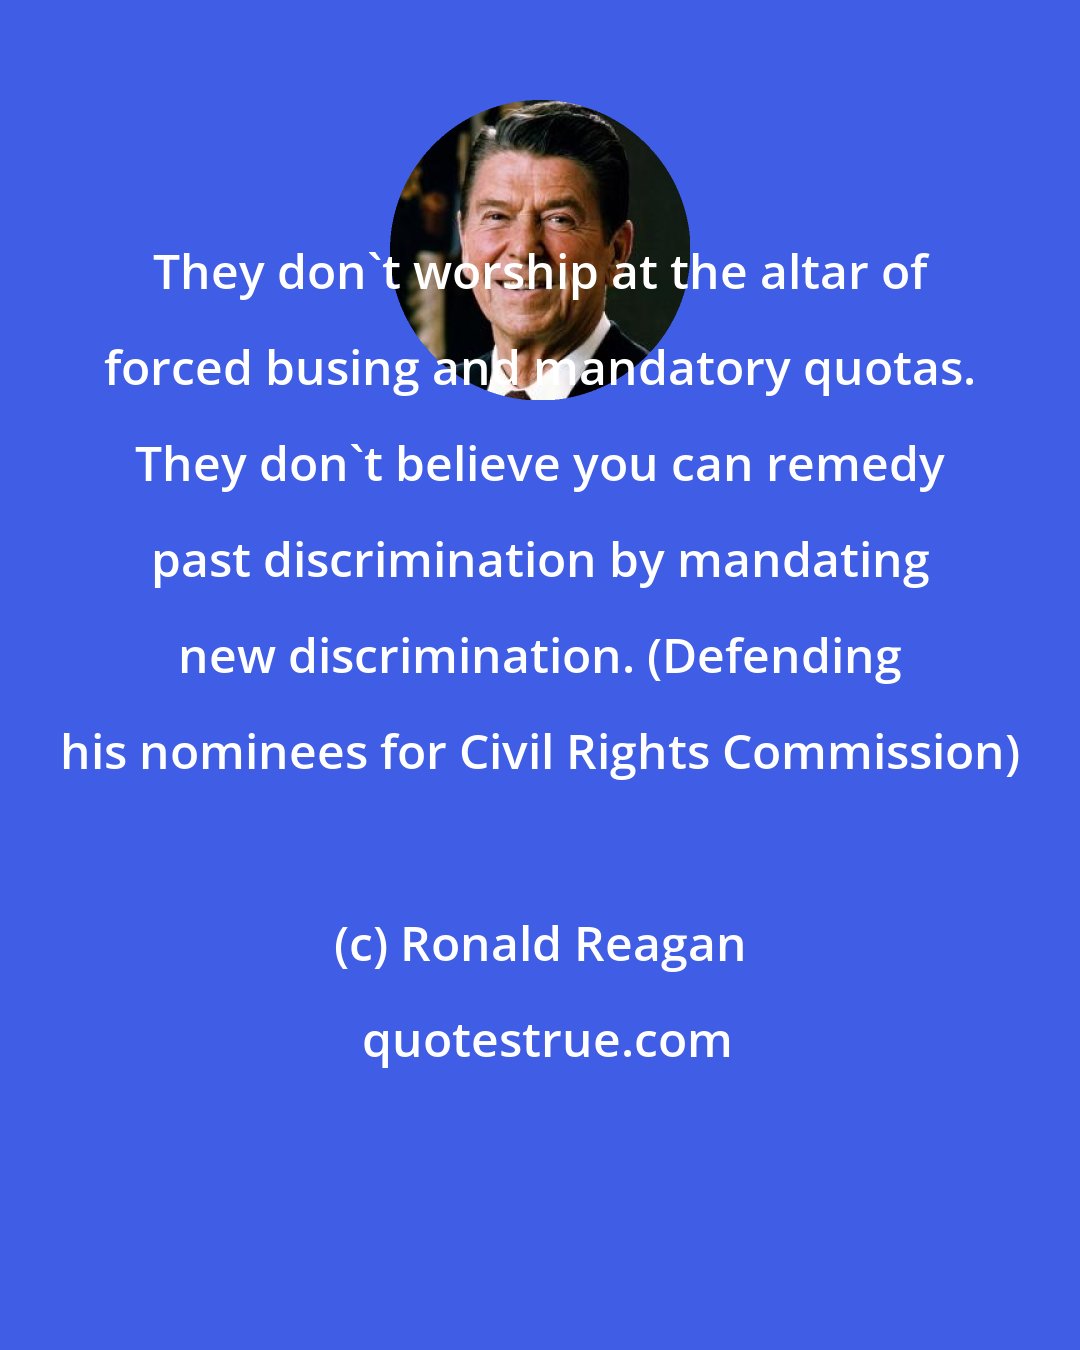 Ronald Reagan: They don't worship at the altar of forced busing and mandatory quotas. They don't believe you can remedy past discrimination by mandating new discrimination. (Defending his nominees for Civil Rights Commission)